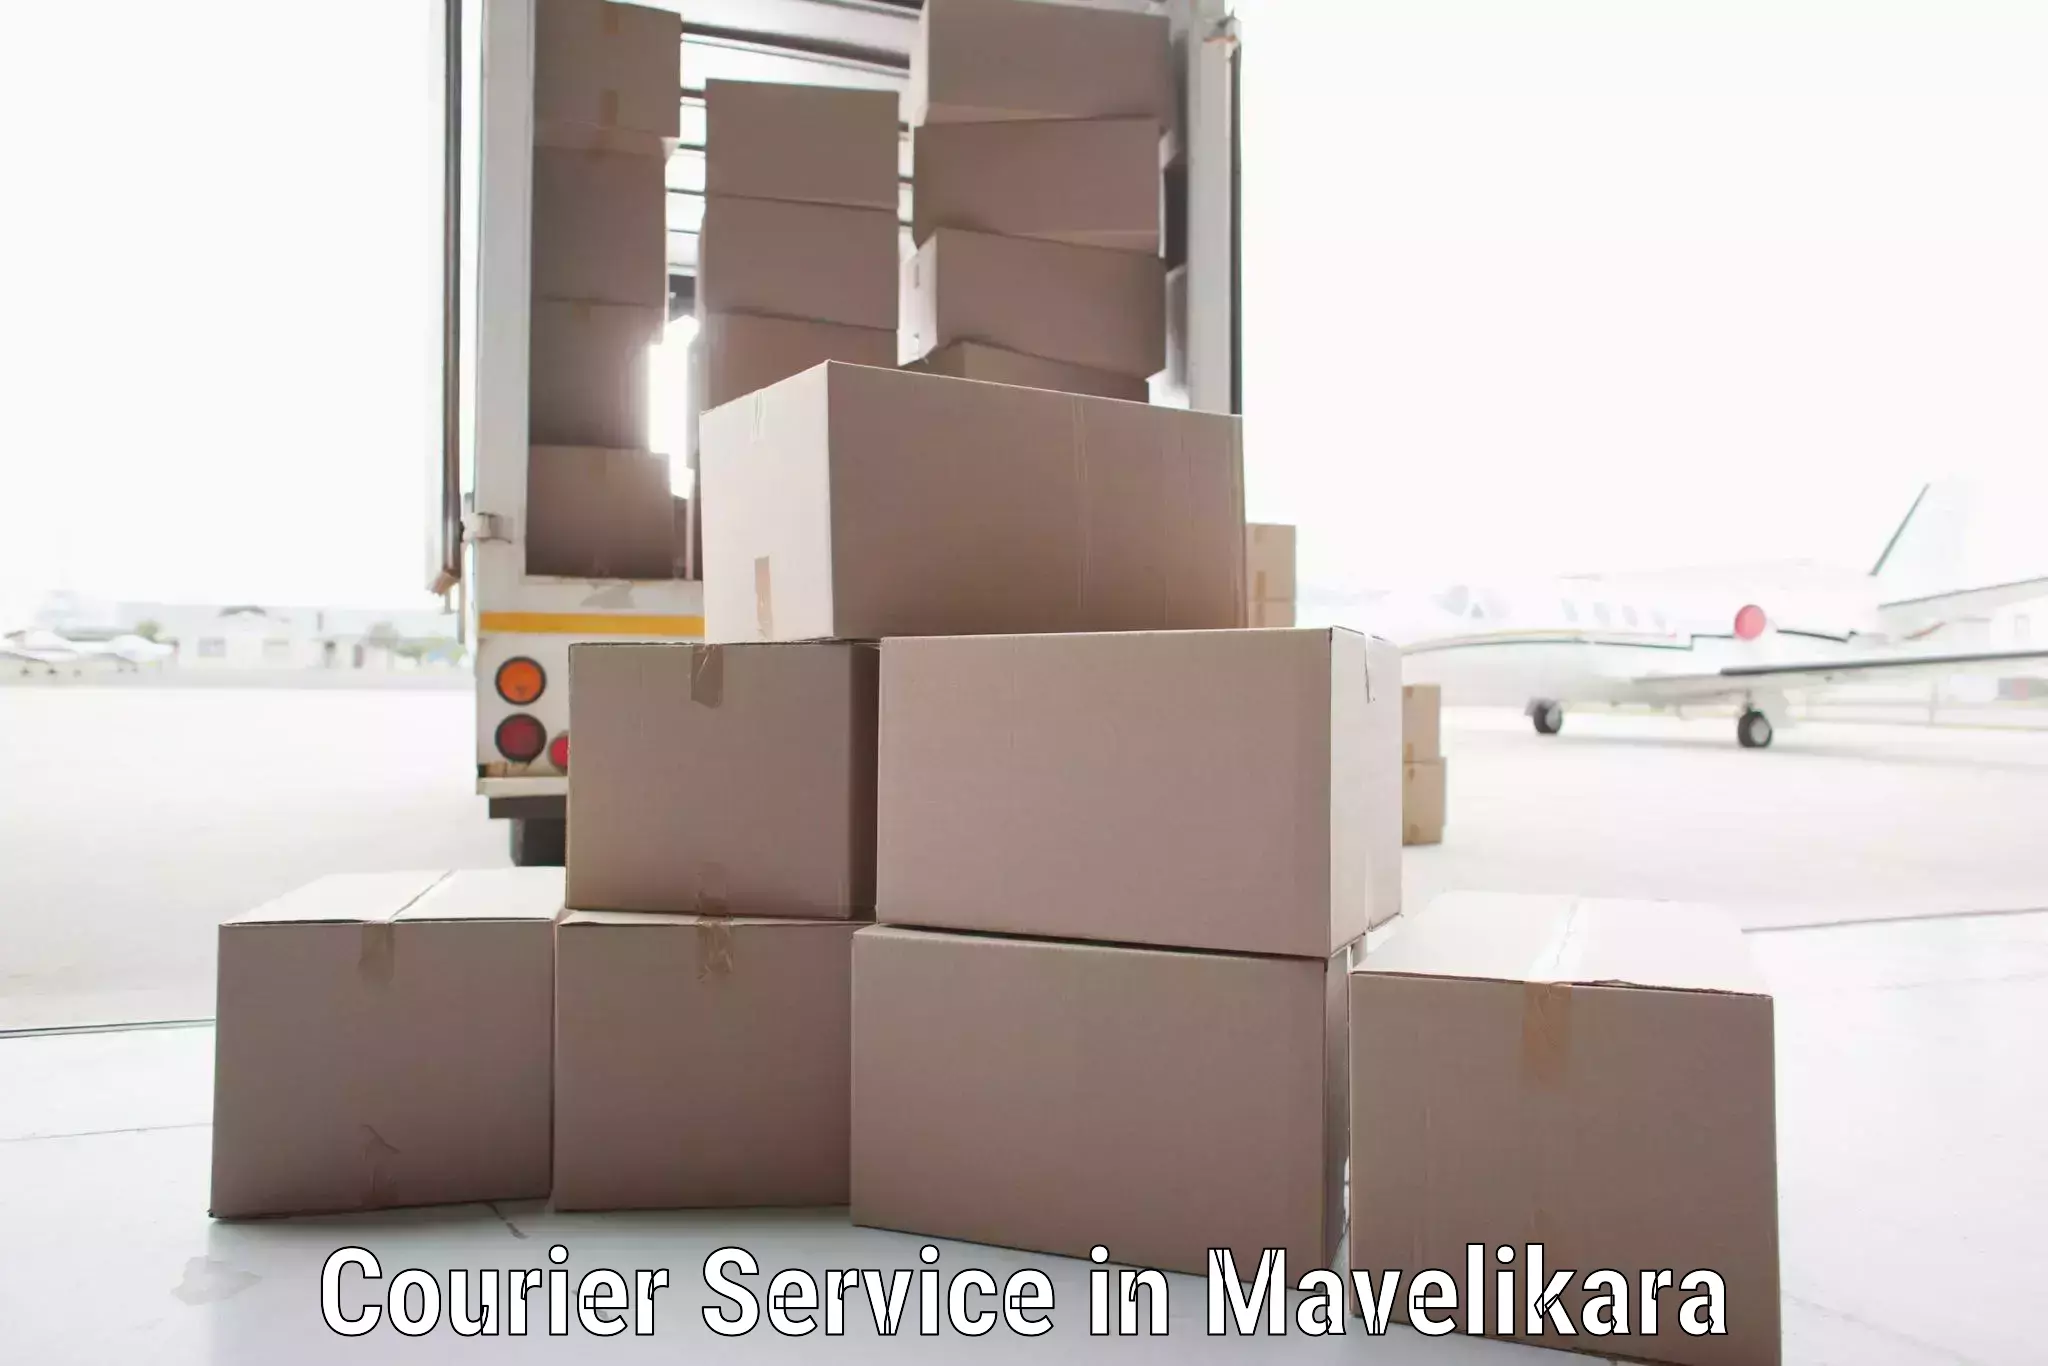 Integrated courier services in Mavelikara